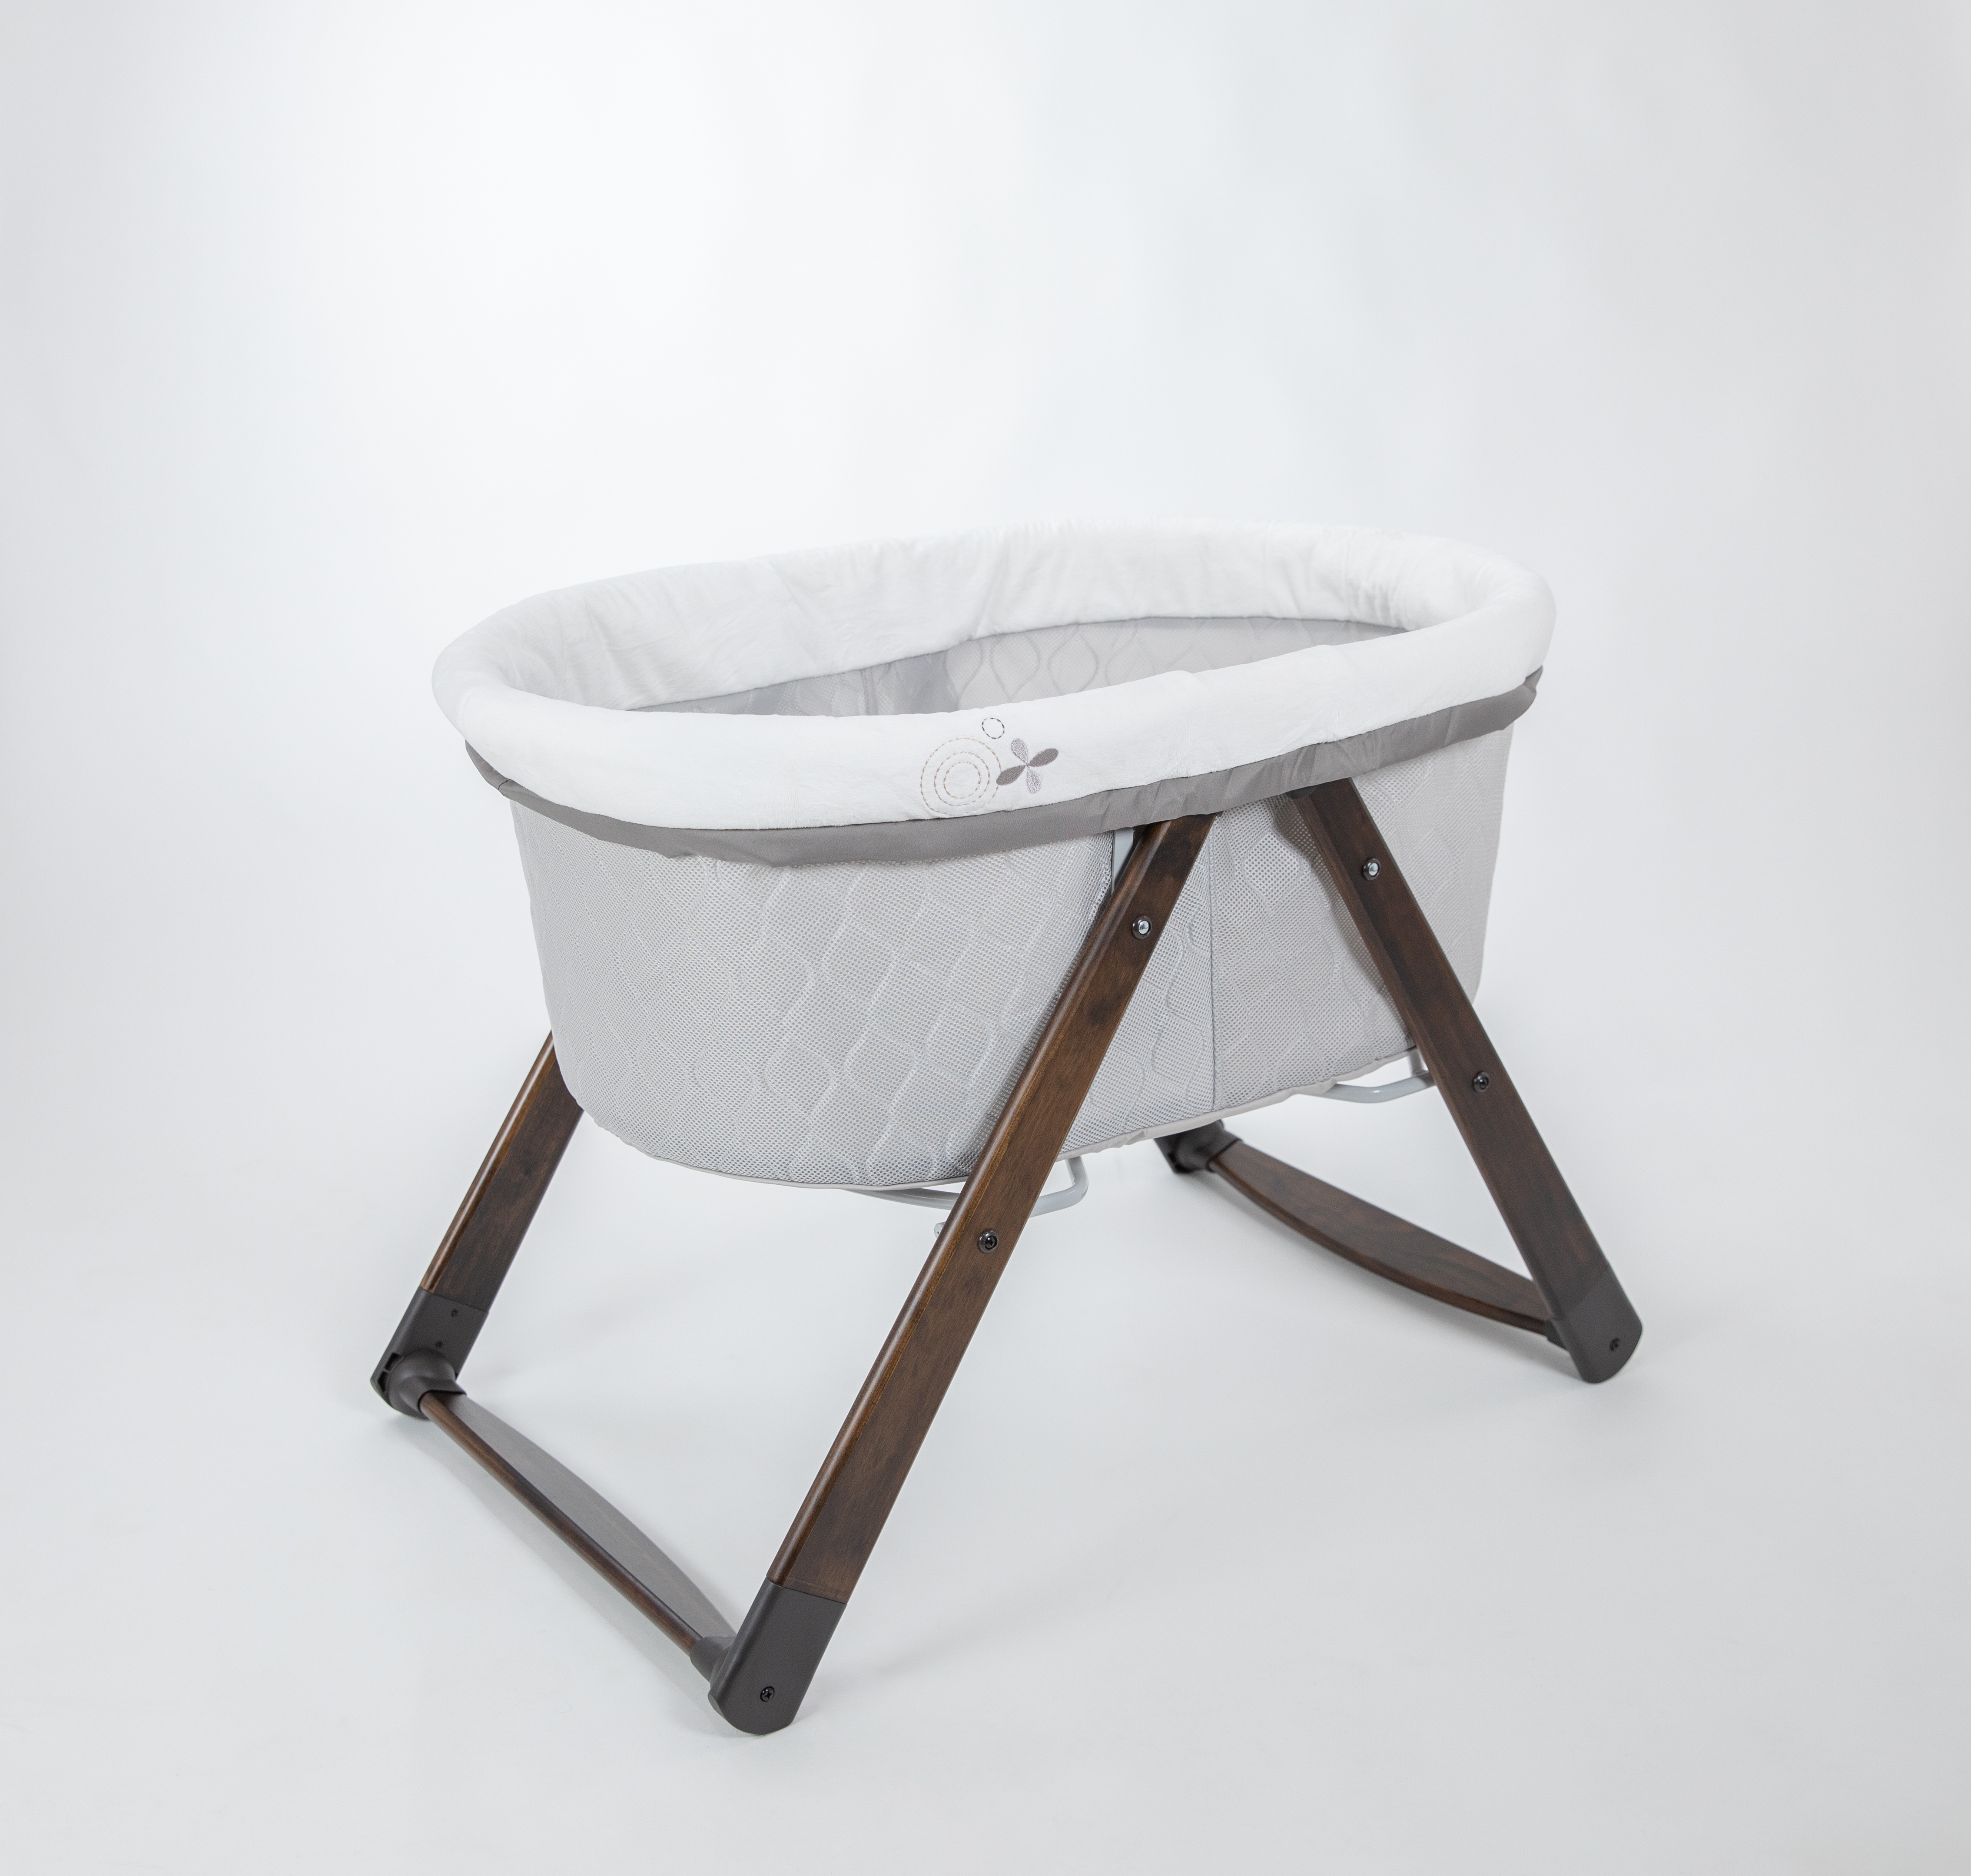 A baby bassinet with a wooden base.